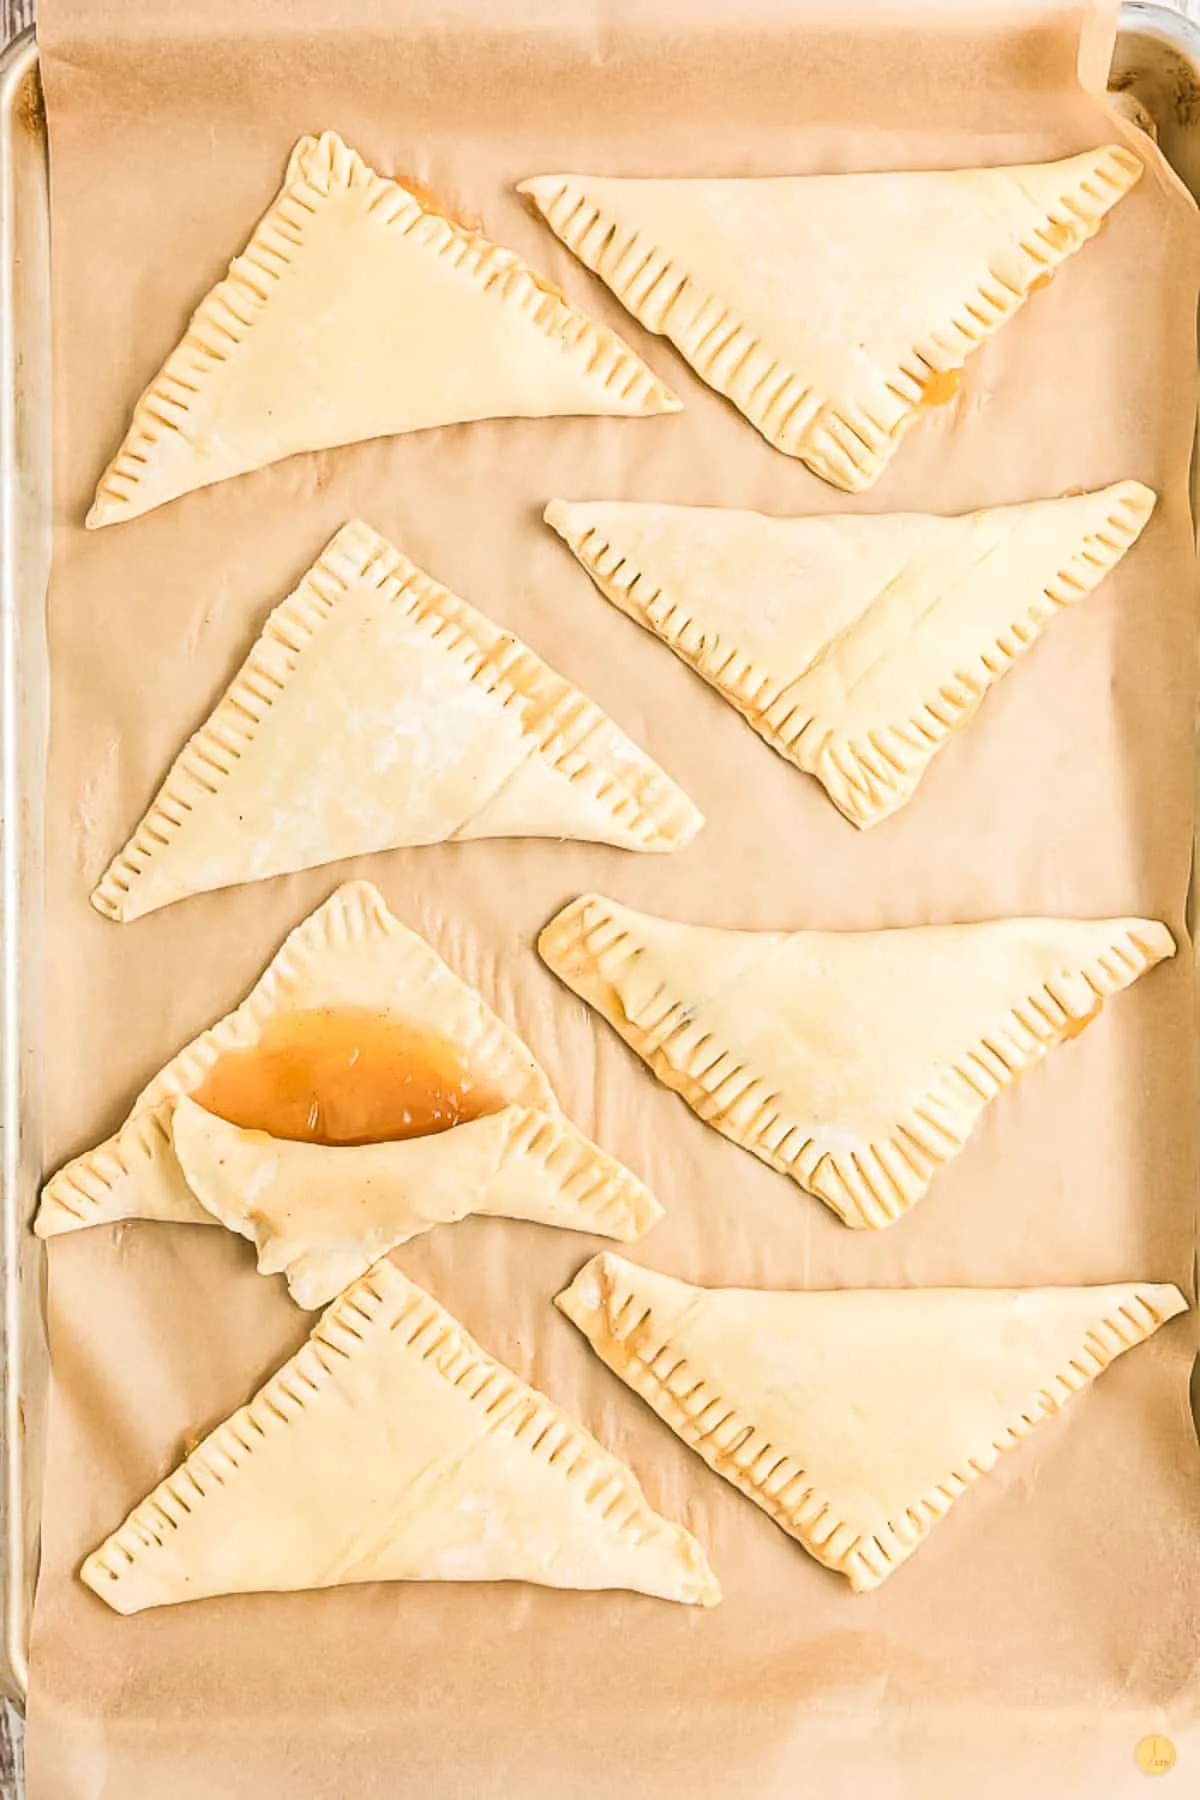 puff pastry triangles on parchment paper